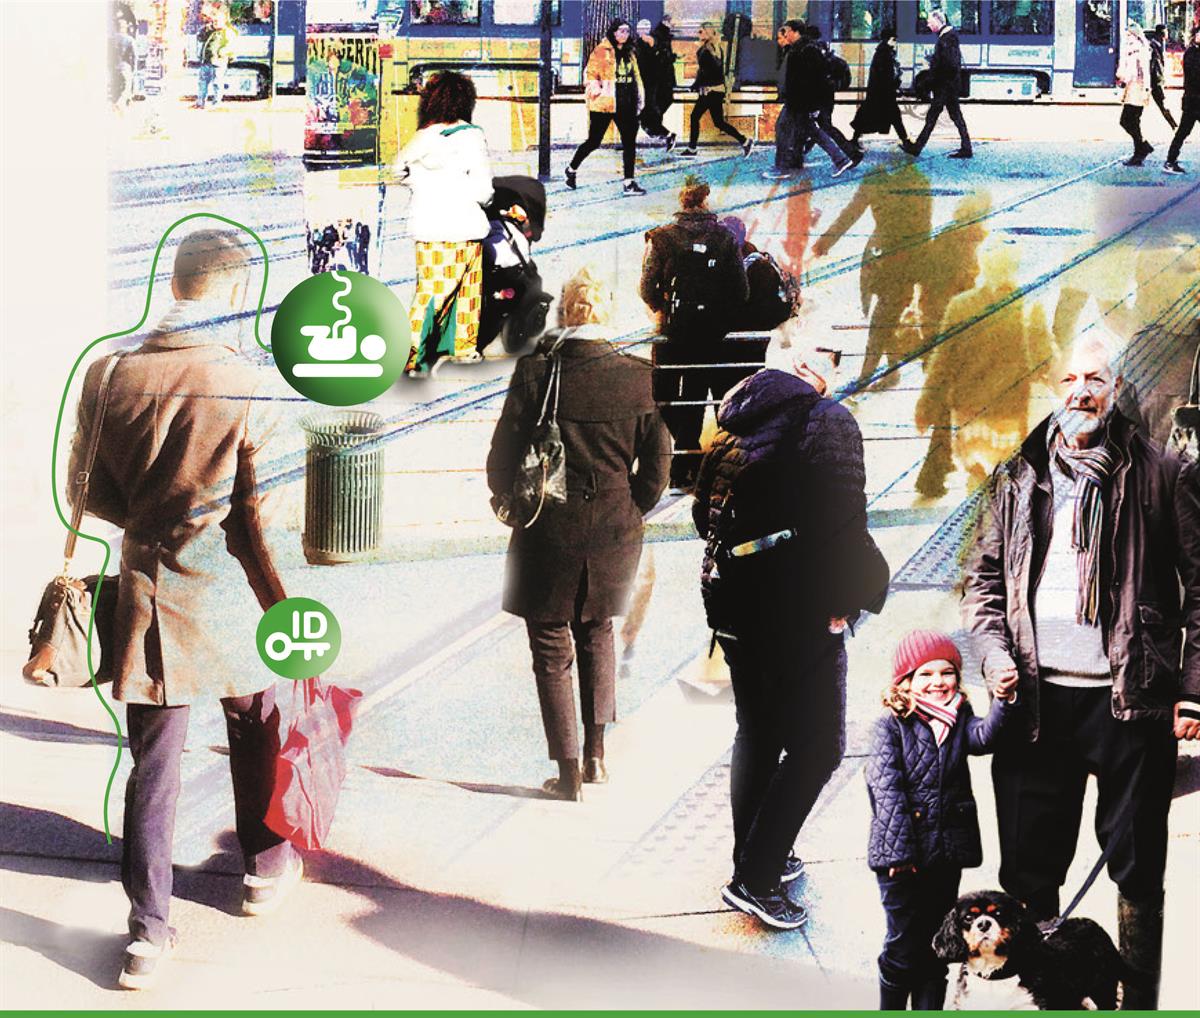 Urban morning mood, on the way to something… everyday life and the moment 
depicted through a collage. Showing a cross section of the population, with focus on seven different people's life situations and their need for coordinated assistance for a set of public agencies.
Symbolism and network point out the new strategic thinking